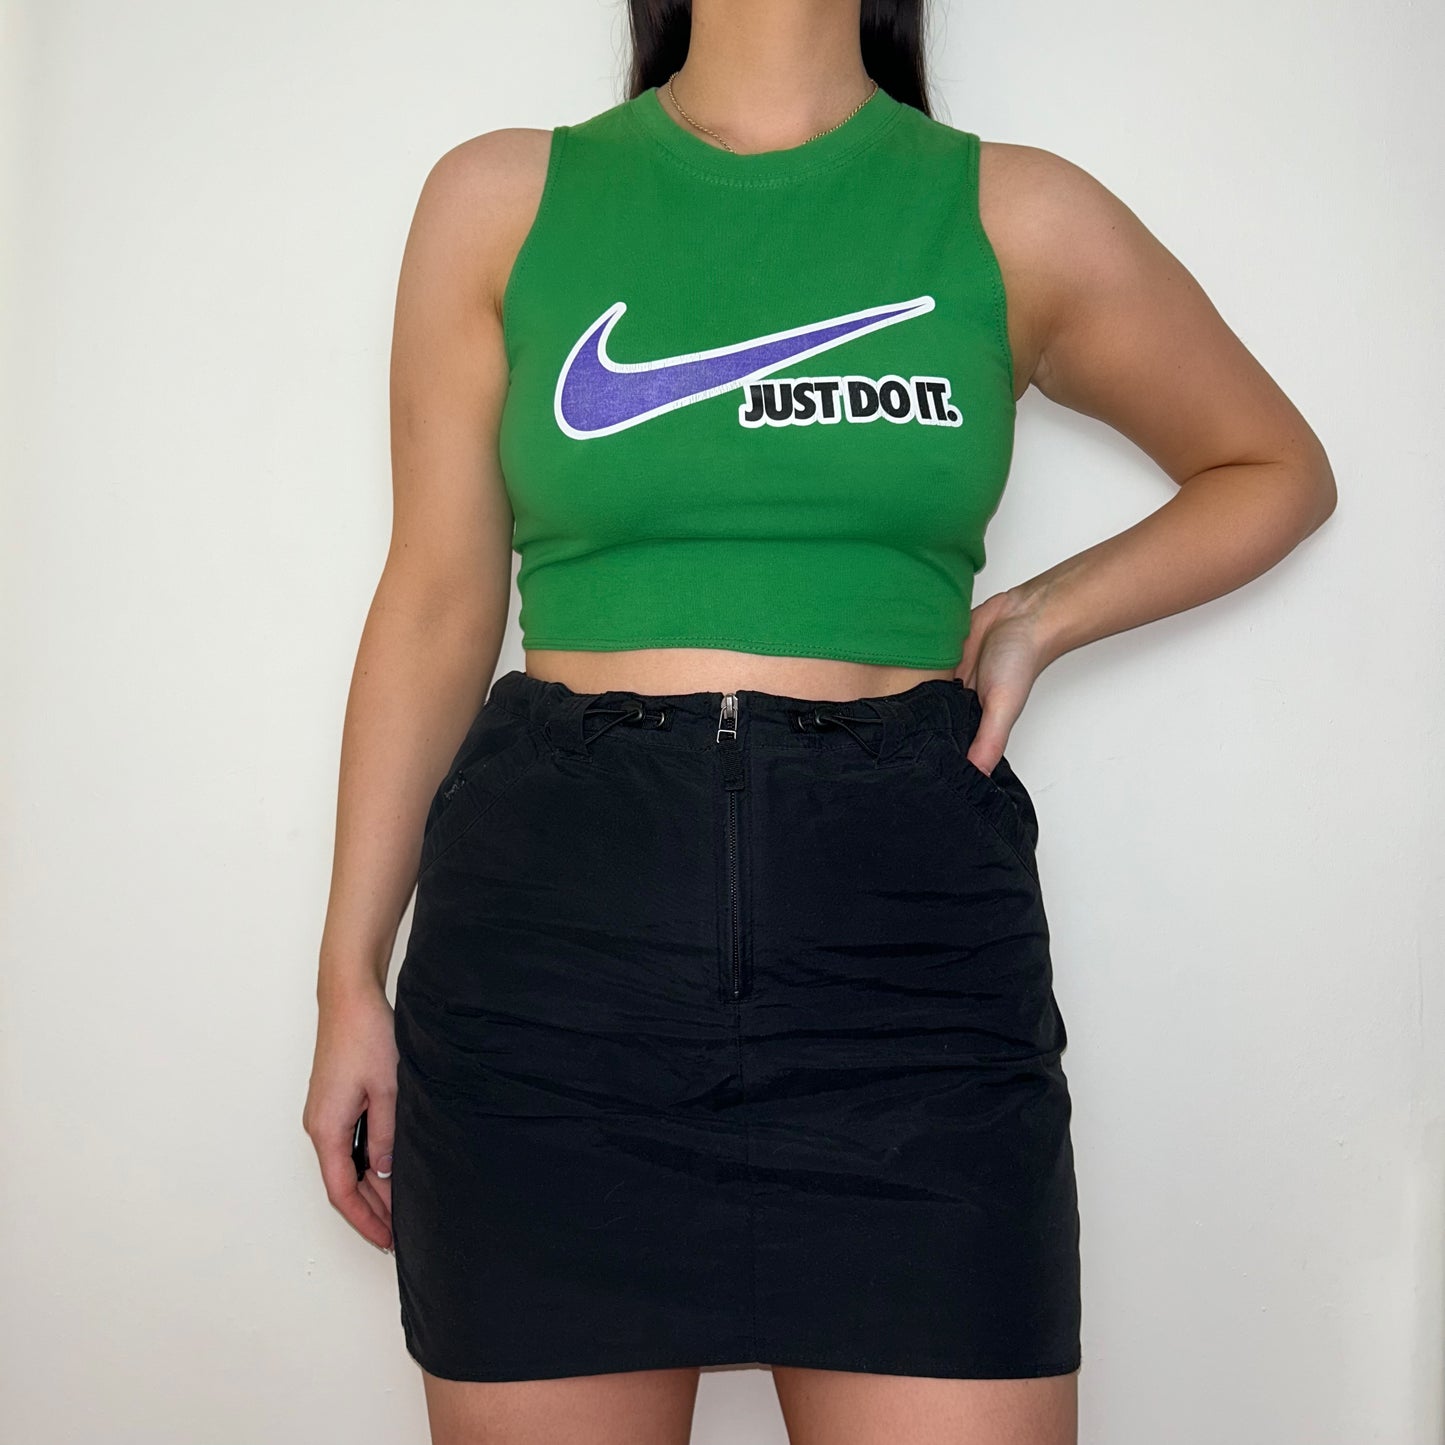 green sleeveless crop top with white and blue nike logo shown on a model wearing a black skirt